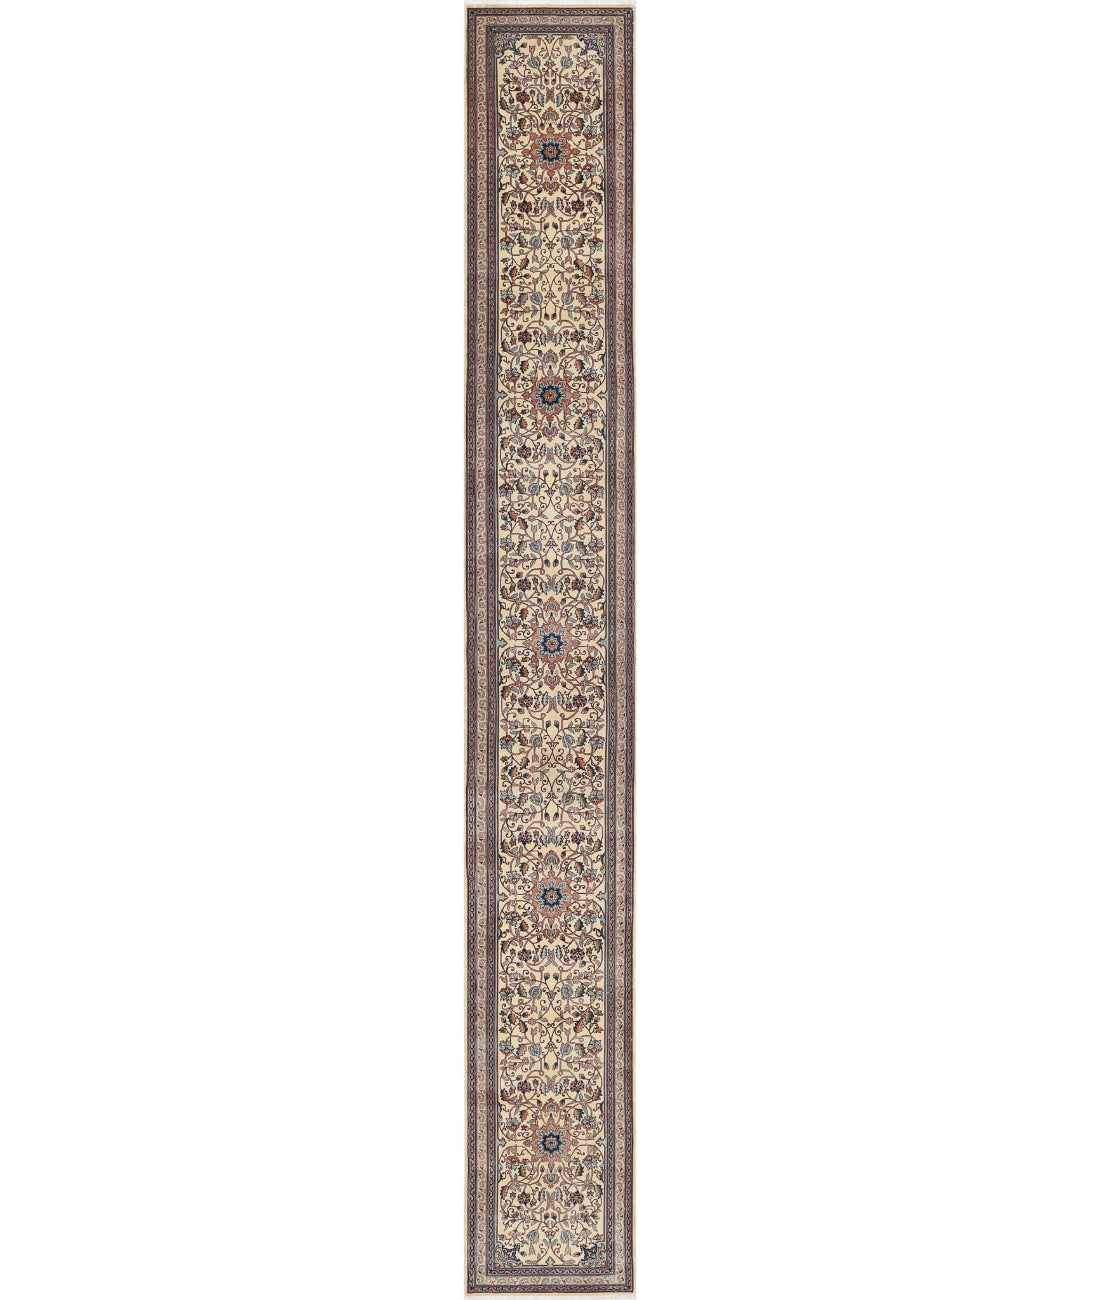 Hand Knotted Heritage Persian Style Wool Rug - 2'6'' x 19'10'' 2'6'' x 19'10'' (75 X 595) / Beige / Green